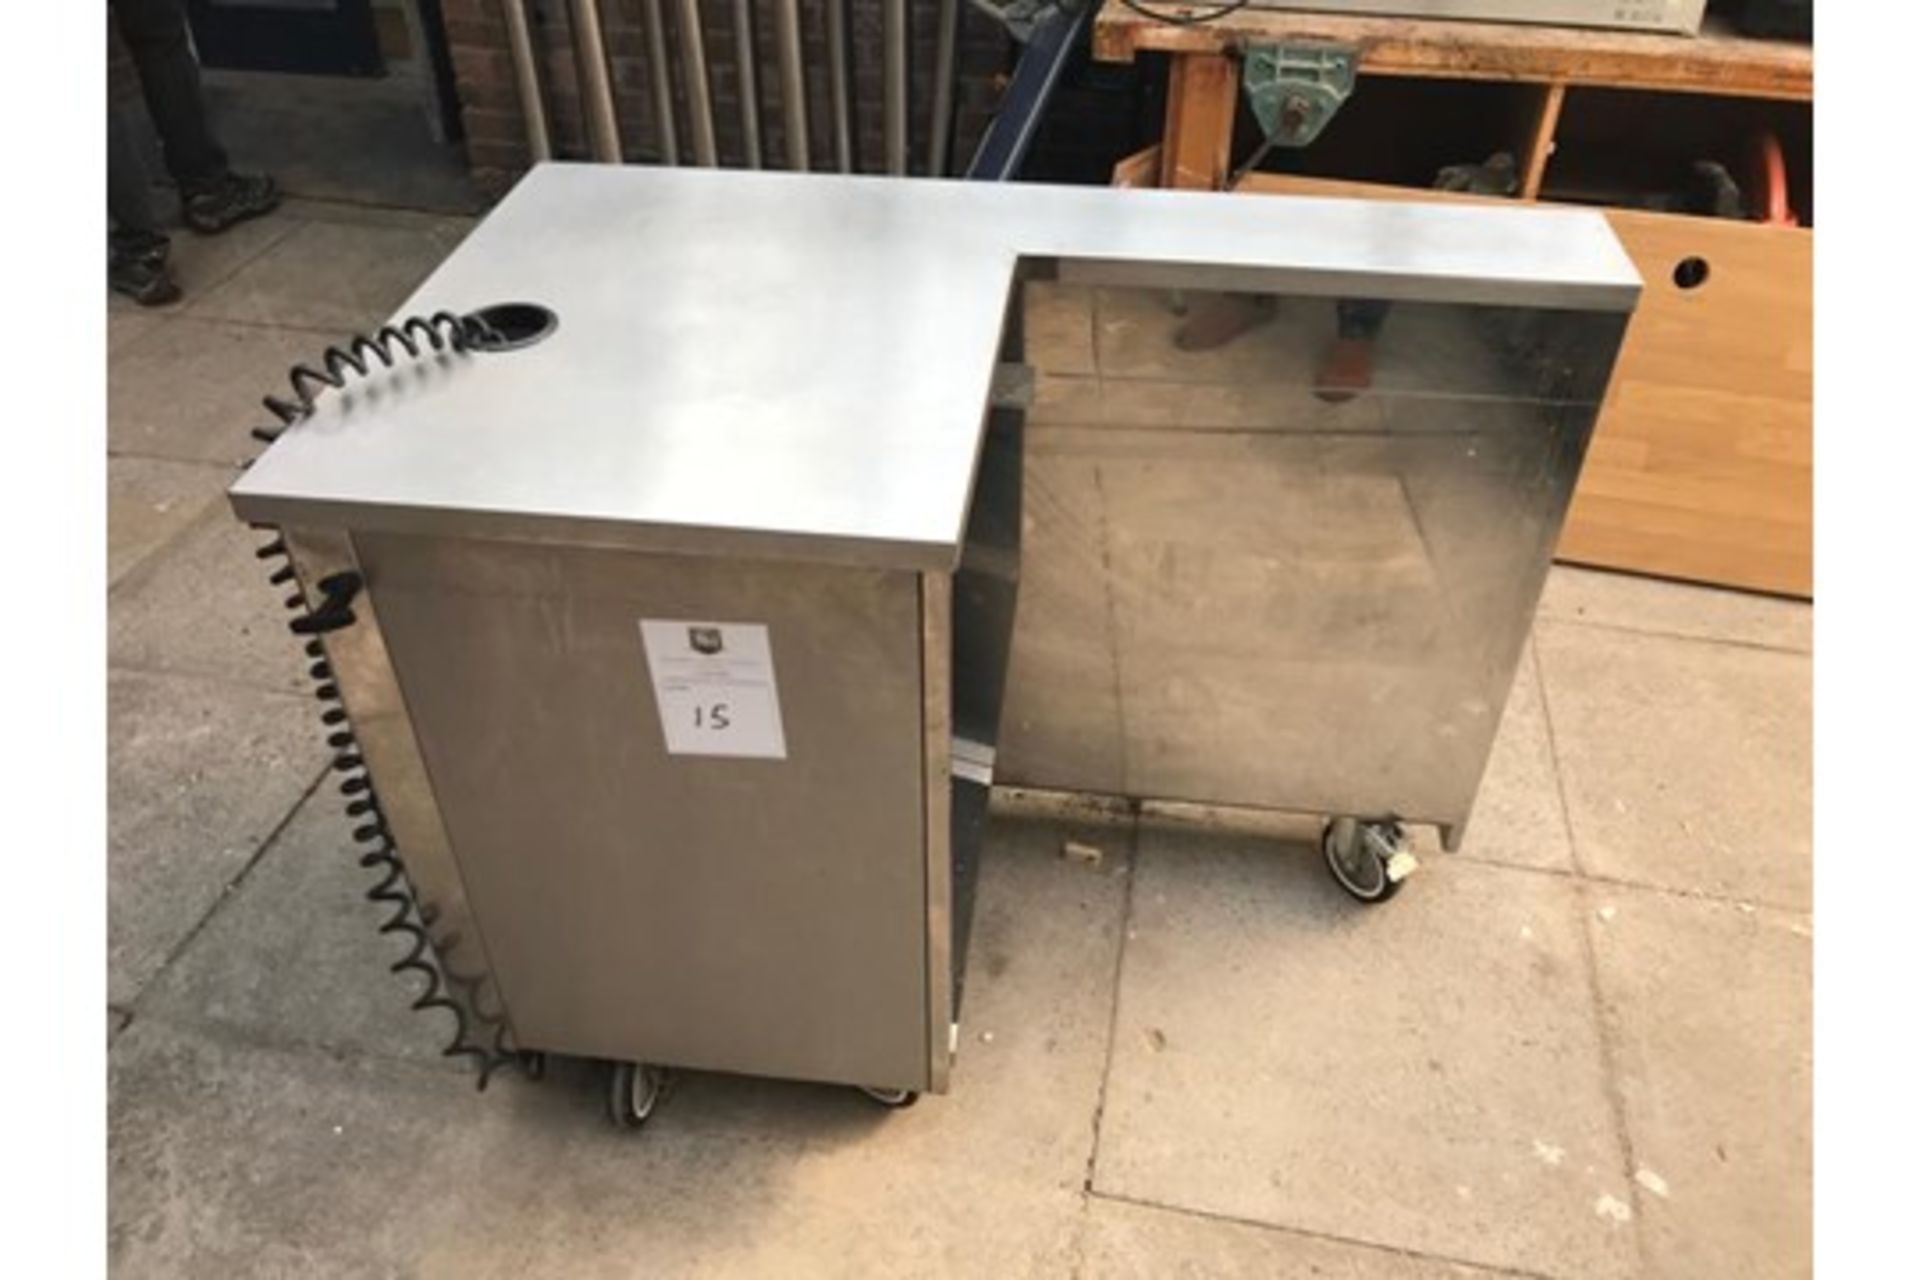 Moffat Left Hand Cash Unit Stainless Steel - NO RESERVE